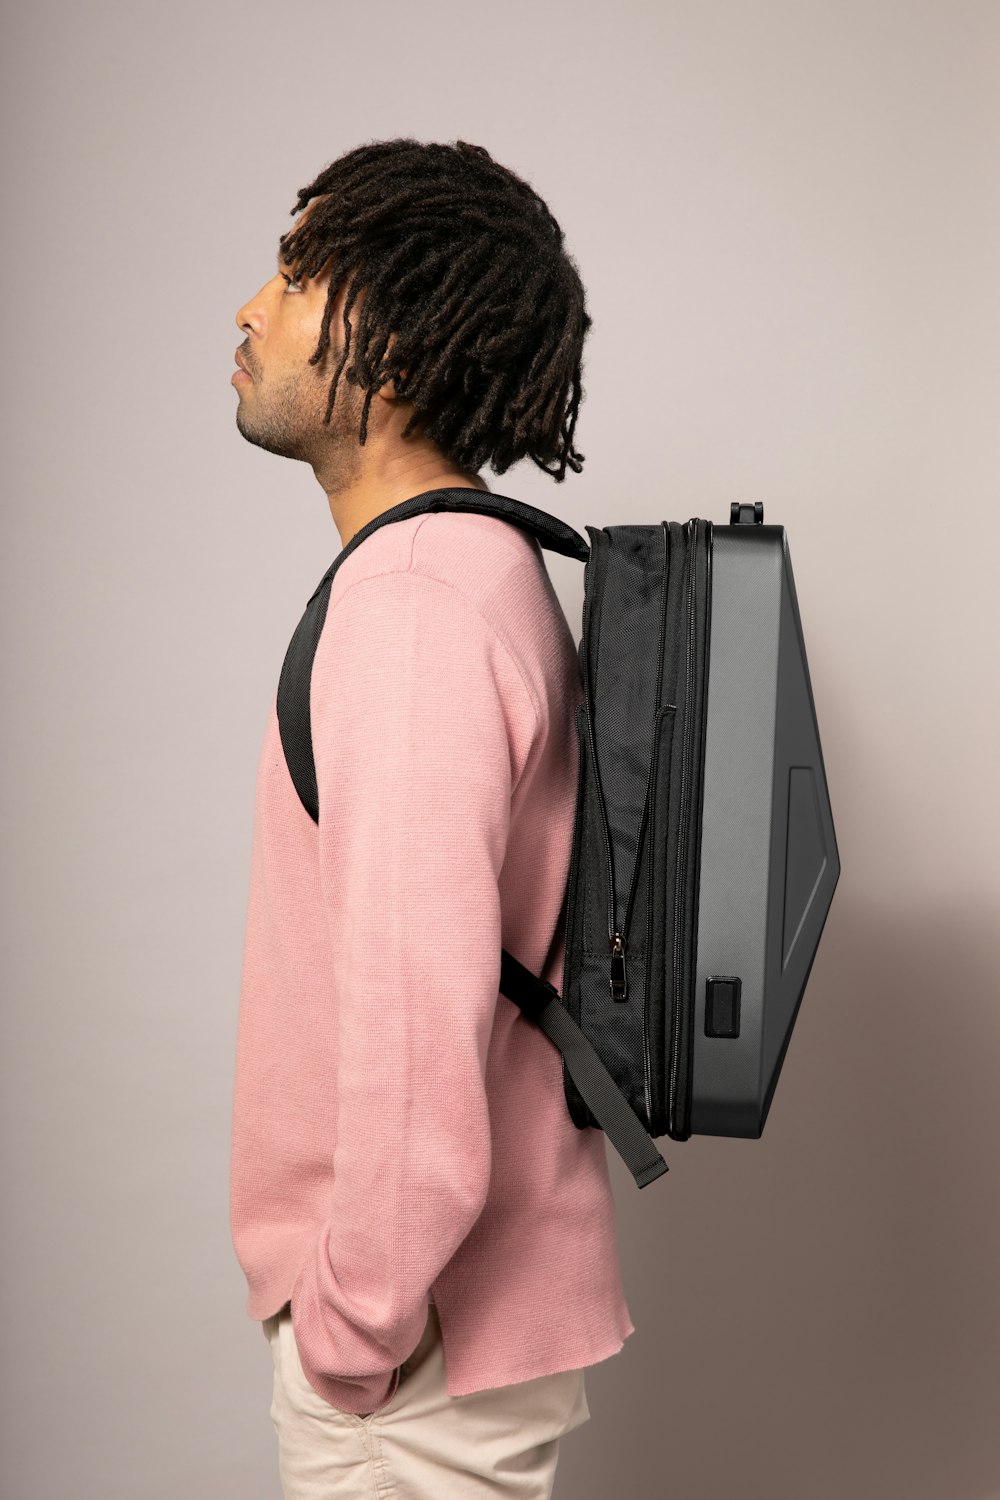 a man with dreadlocks and a backpack